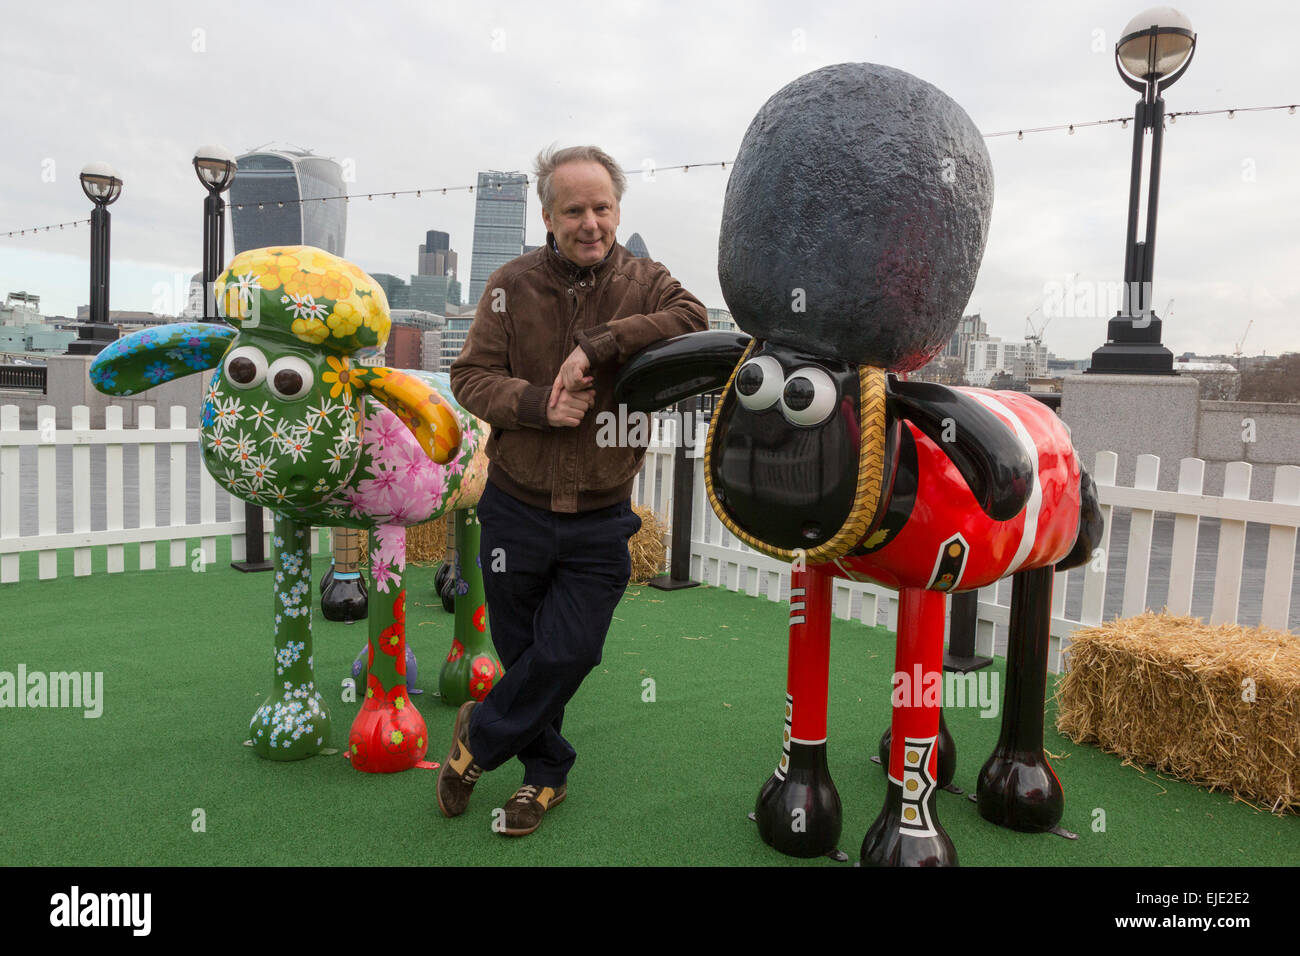 London, UK. 24 March 2015. Animator Nick Park poses with sheep 'Petal' designed by Emily Ketteringham and the 'Yeoman of the Baaard' sheep designed by Vivi Cuevas at the Shaun in the City London launch. Aardman Animations' 'Shaun the Sheep' are set to be dotted around London from Saturday 28th March to form a special arts trail that will benefit thousands of children in hospitals around the UK. The sculptures have been designed by high profile artists, designers and celebrities including David Gandy, Zayn Malik, Zandra Rhodes and Cath Kidston and will be auctioned after the exhibition finishes Stock Photo